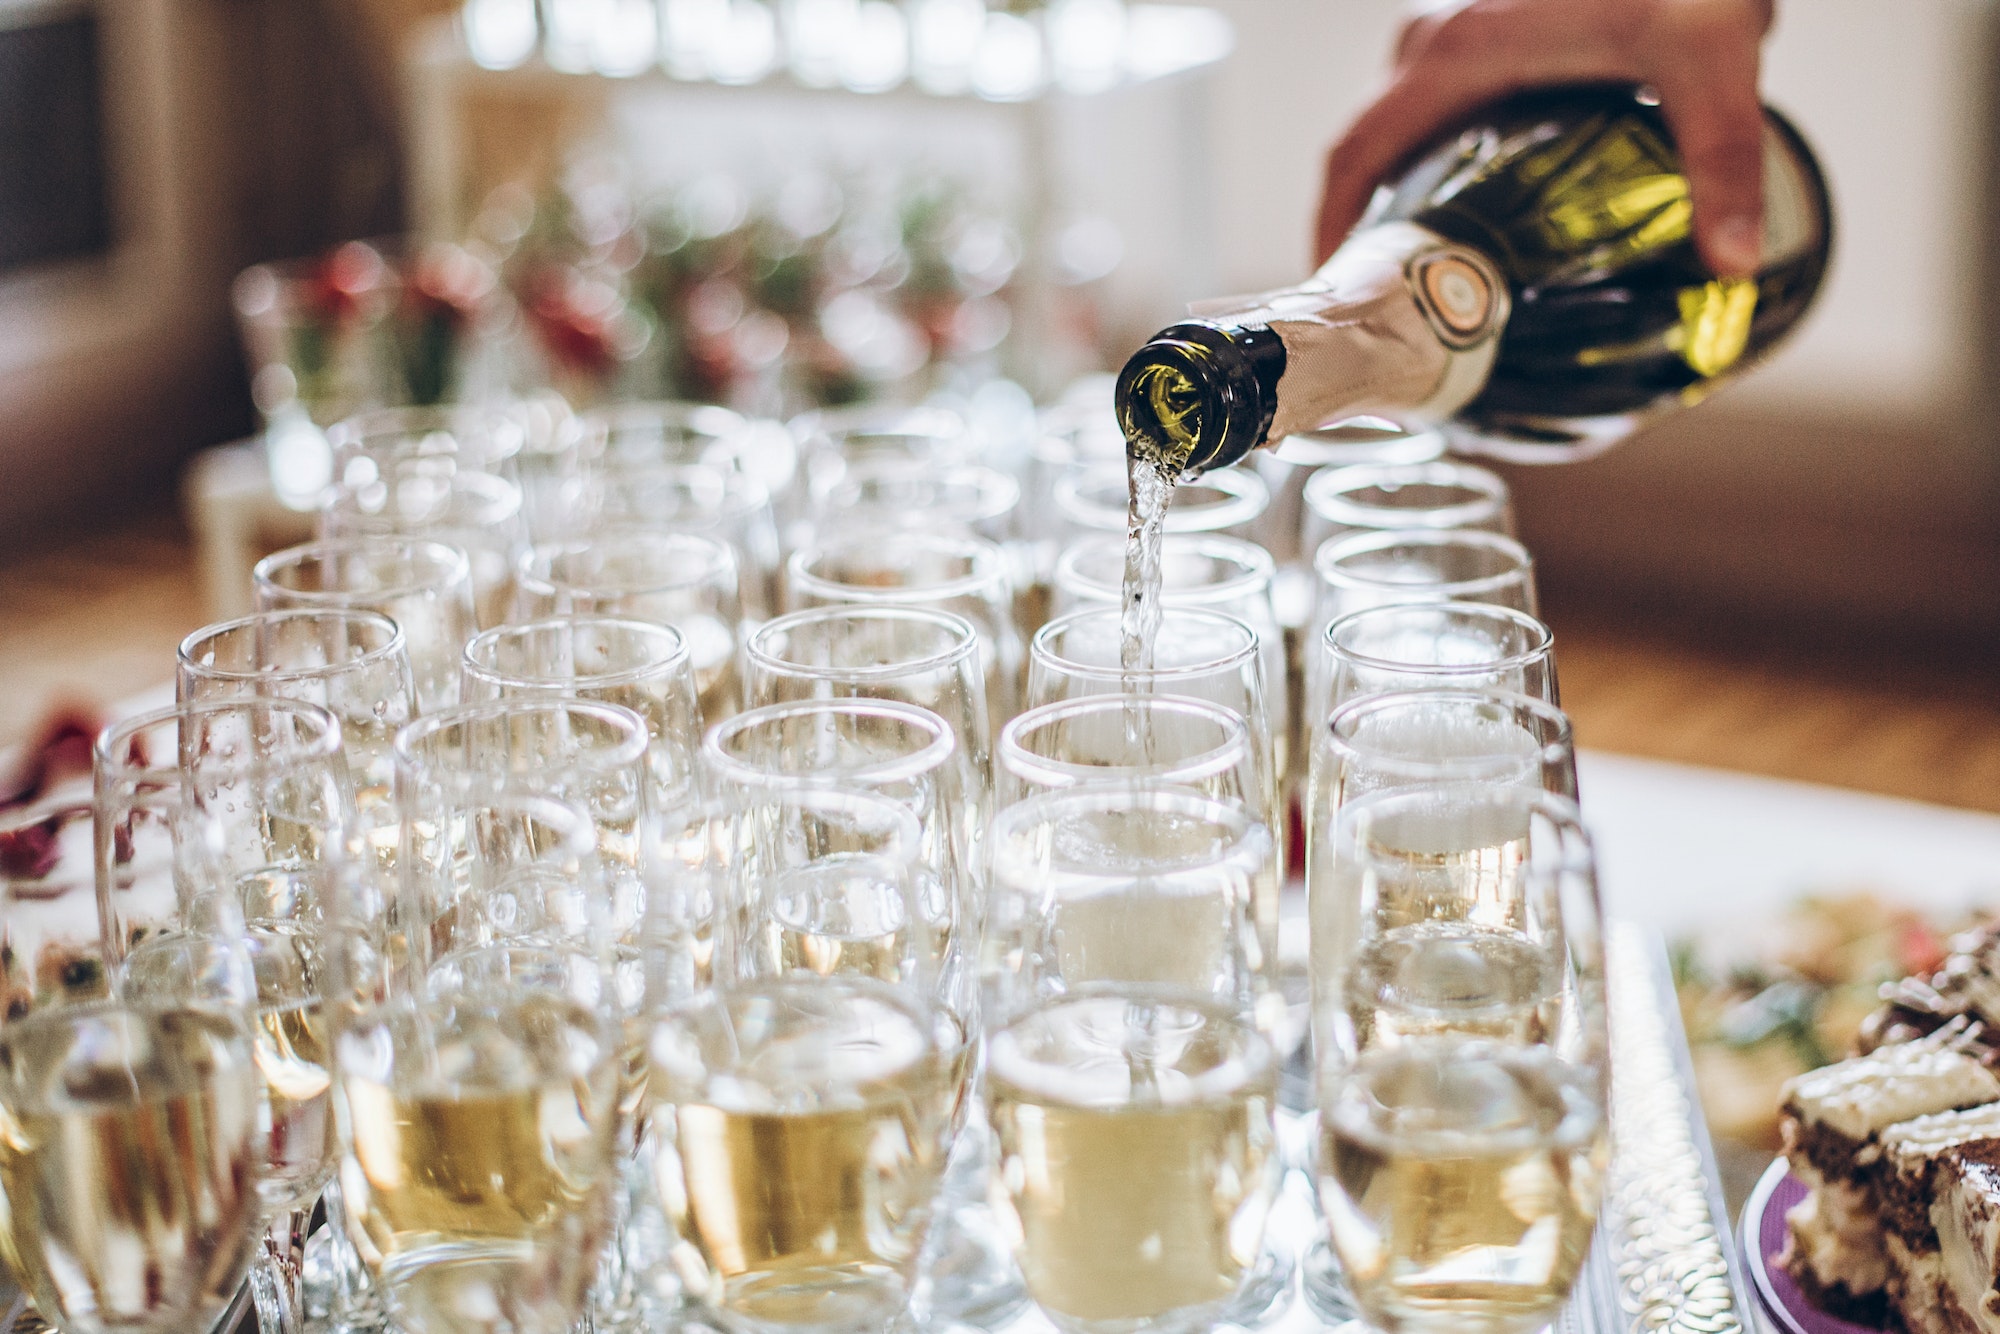 Waiter pouring champagne in stylish glasses at luxury wedding reception